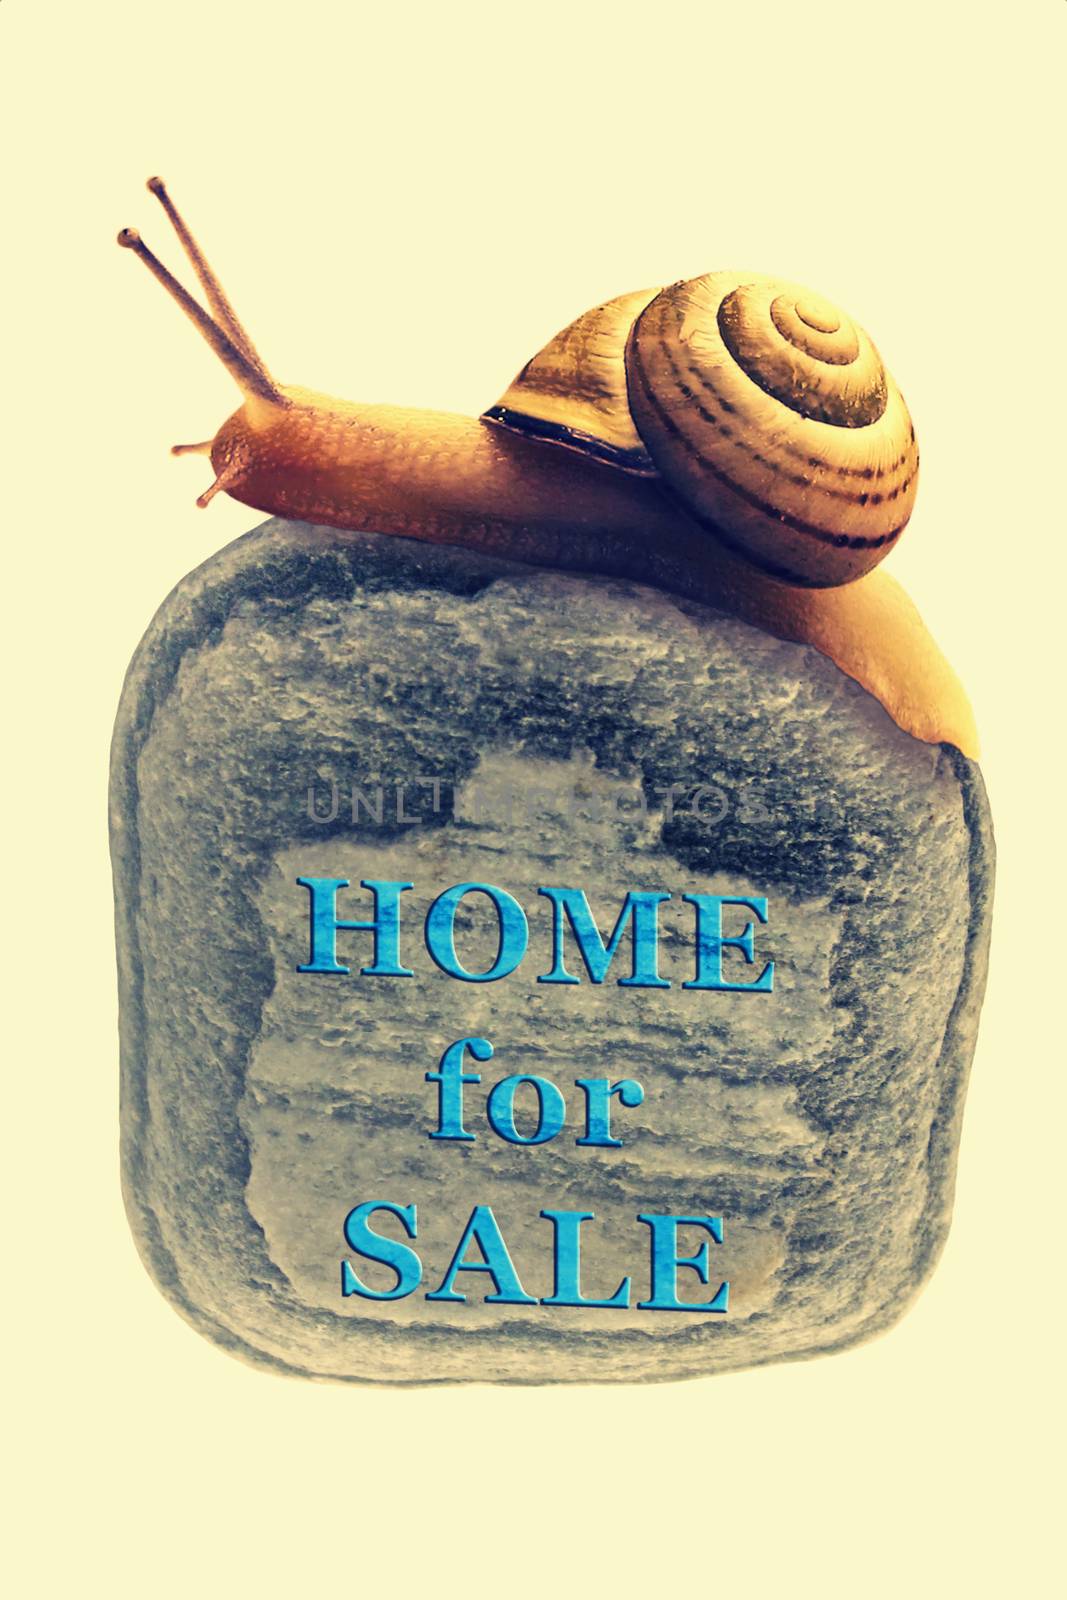 Home For Sale Concept with Zonitoides Nitidus Snail